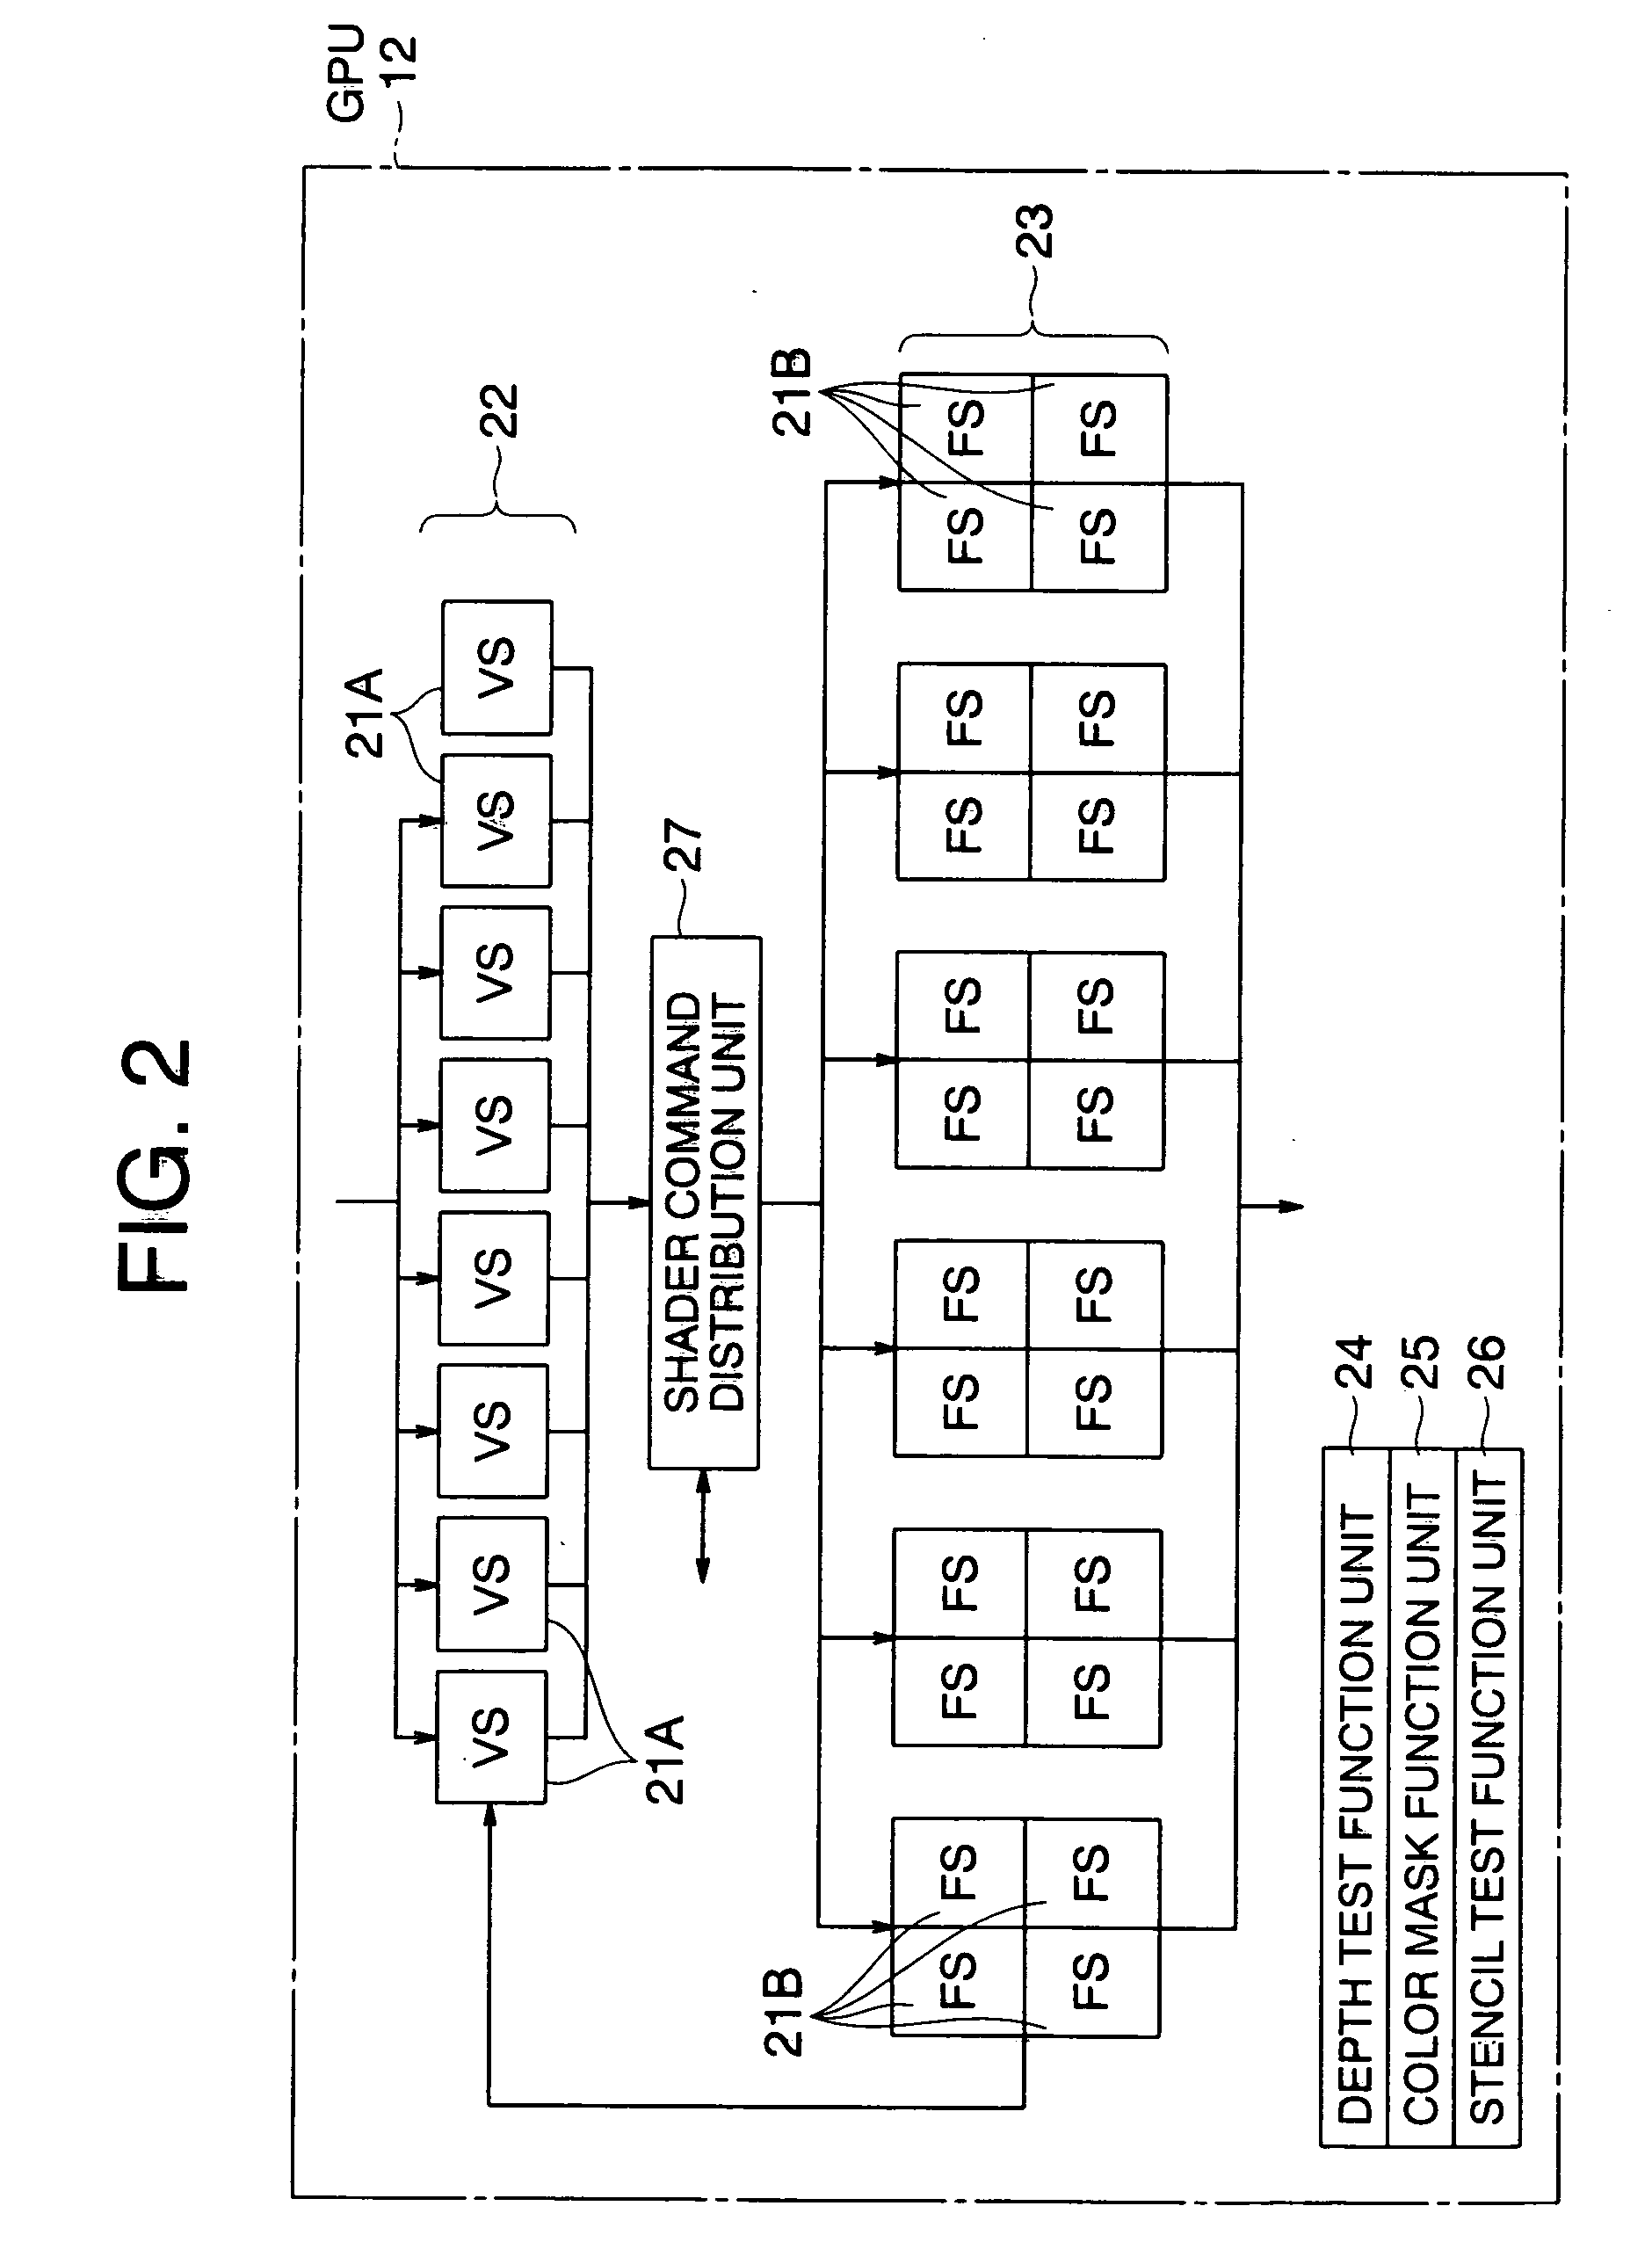 Sliced data structure for particle-based simulation, and method for loading particle-based simulation using sliced data structure into GPU